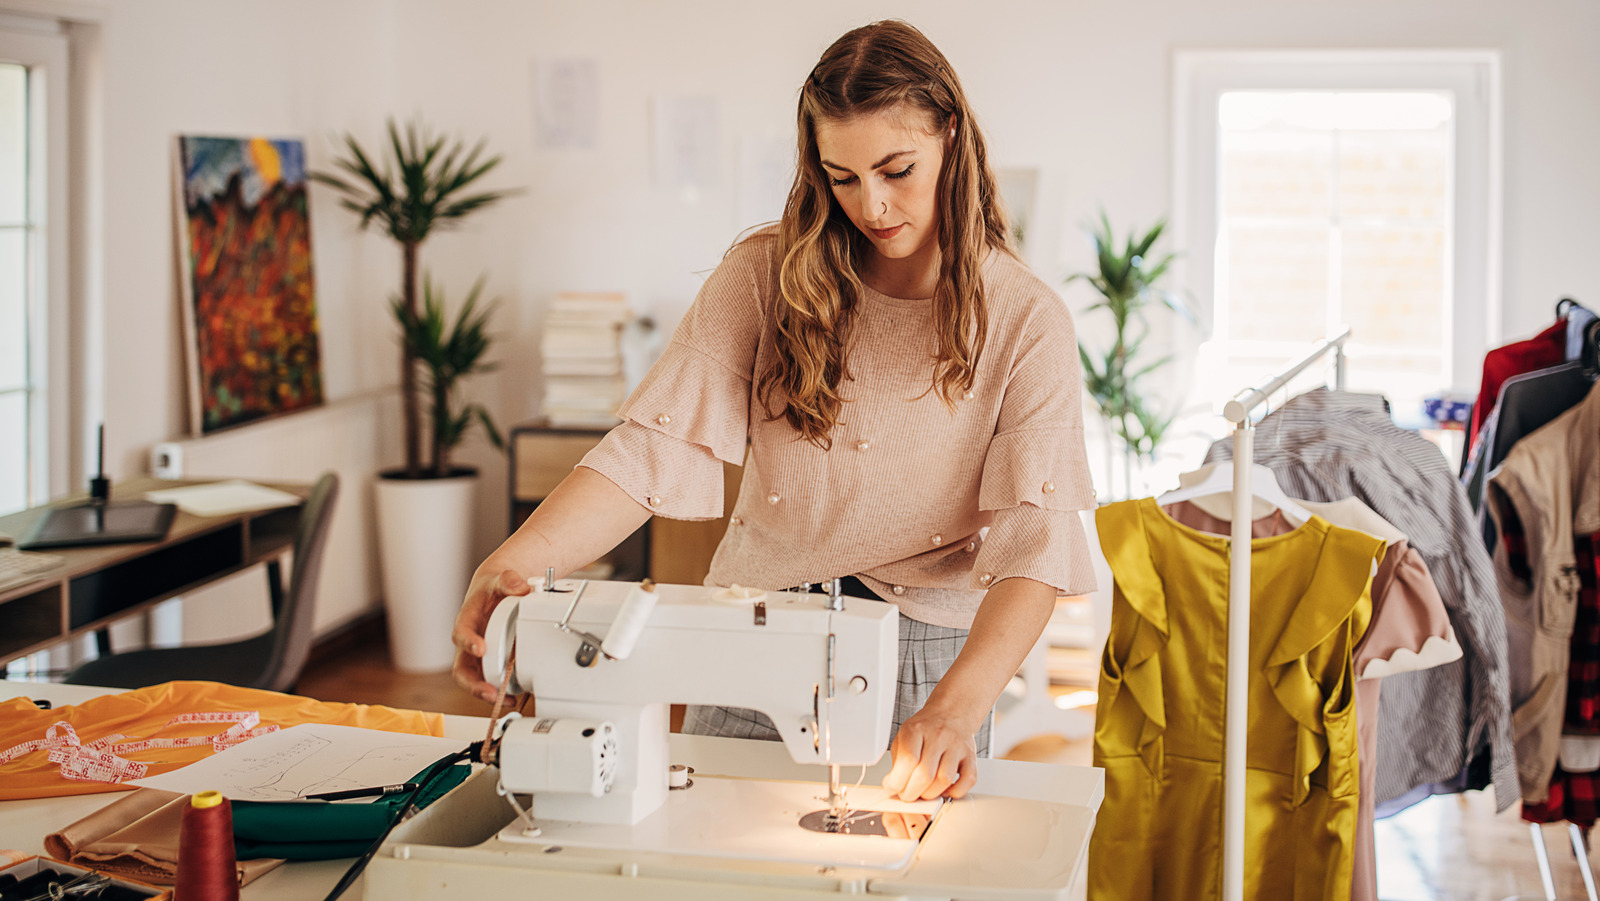 https://www.glam.com/img/gallery/why-learning-to-sew-your-own-clothes-is-so-beneficial-to-your-wardrobe-and-bank-account/l-intro-1696951314.jpg